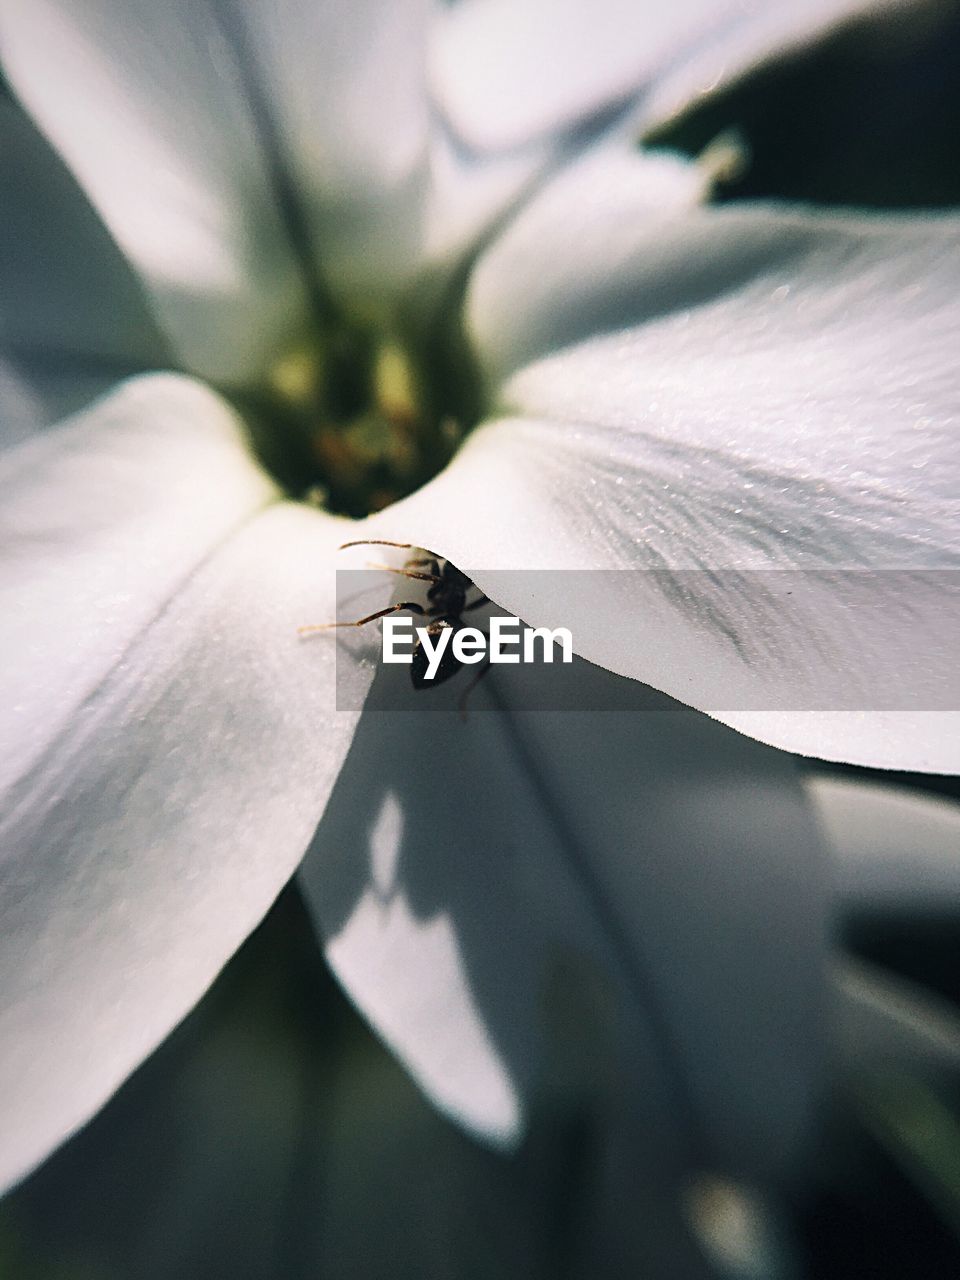 Cropped image of ant crawling on white flower petal